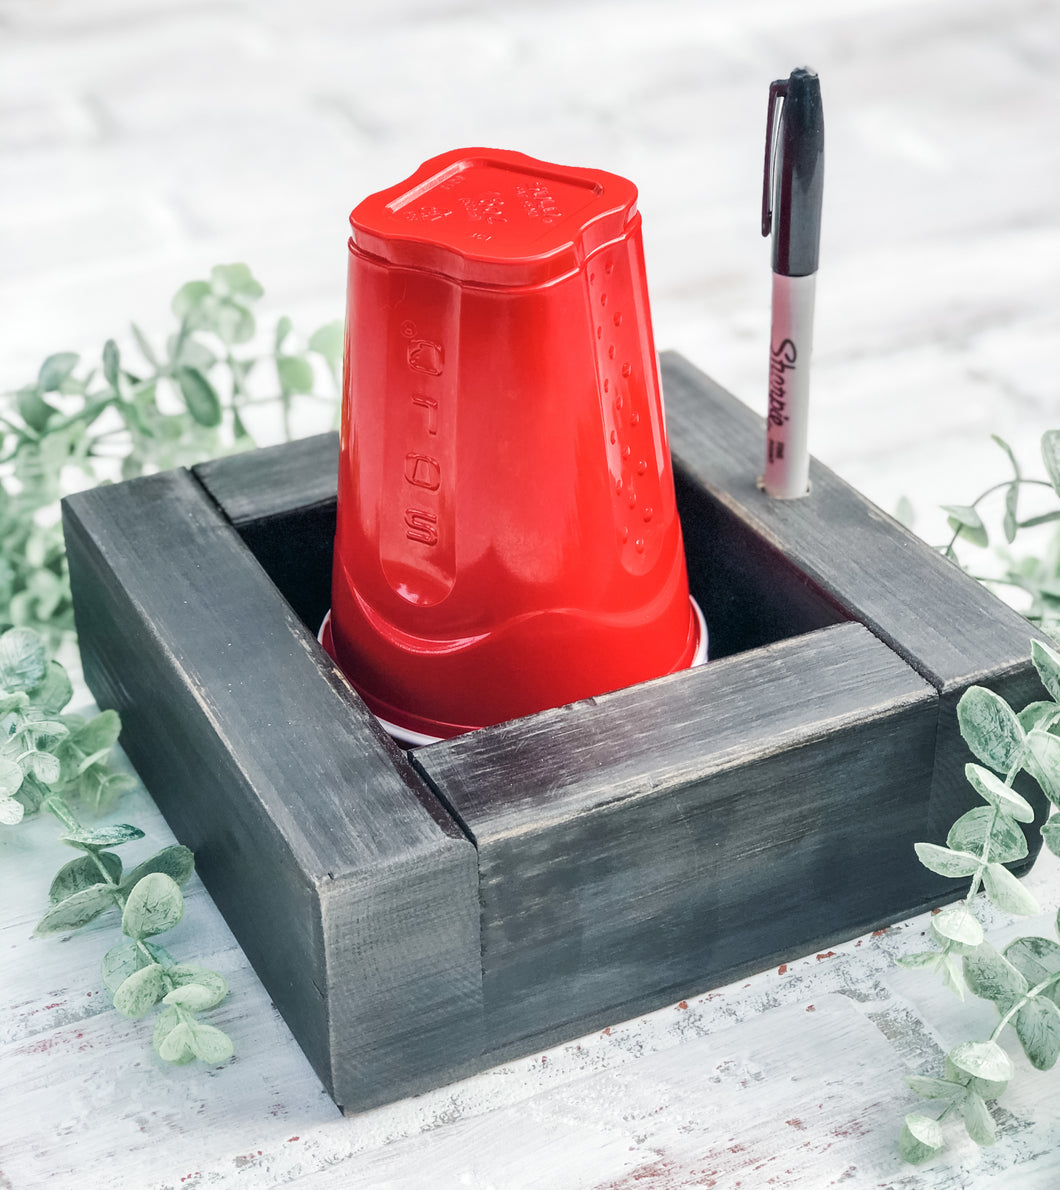 Solo Cup Holder - Personalization Station - Kitchen